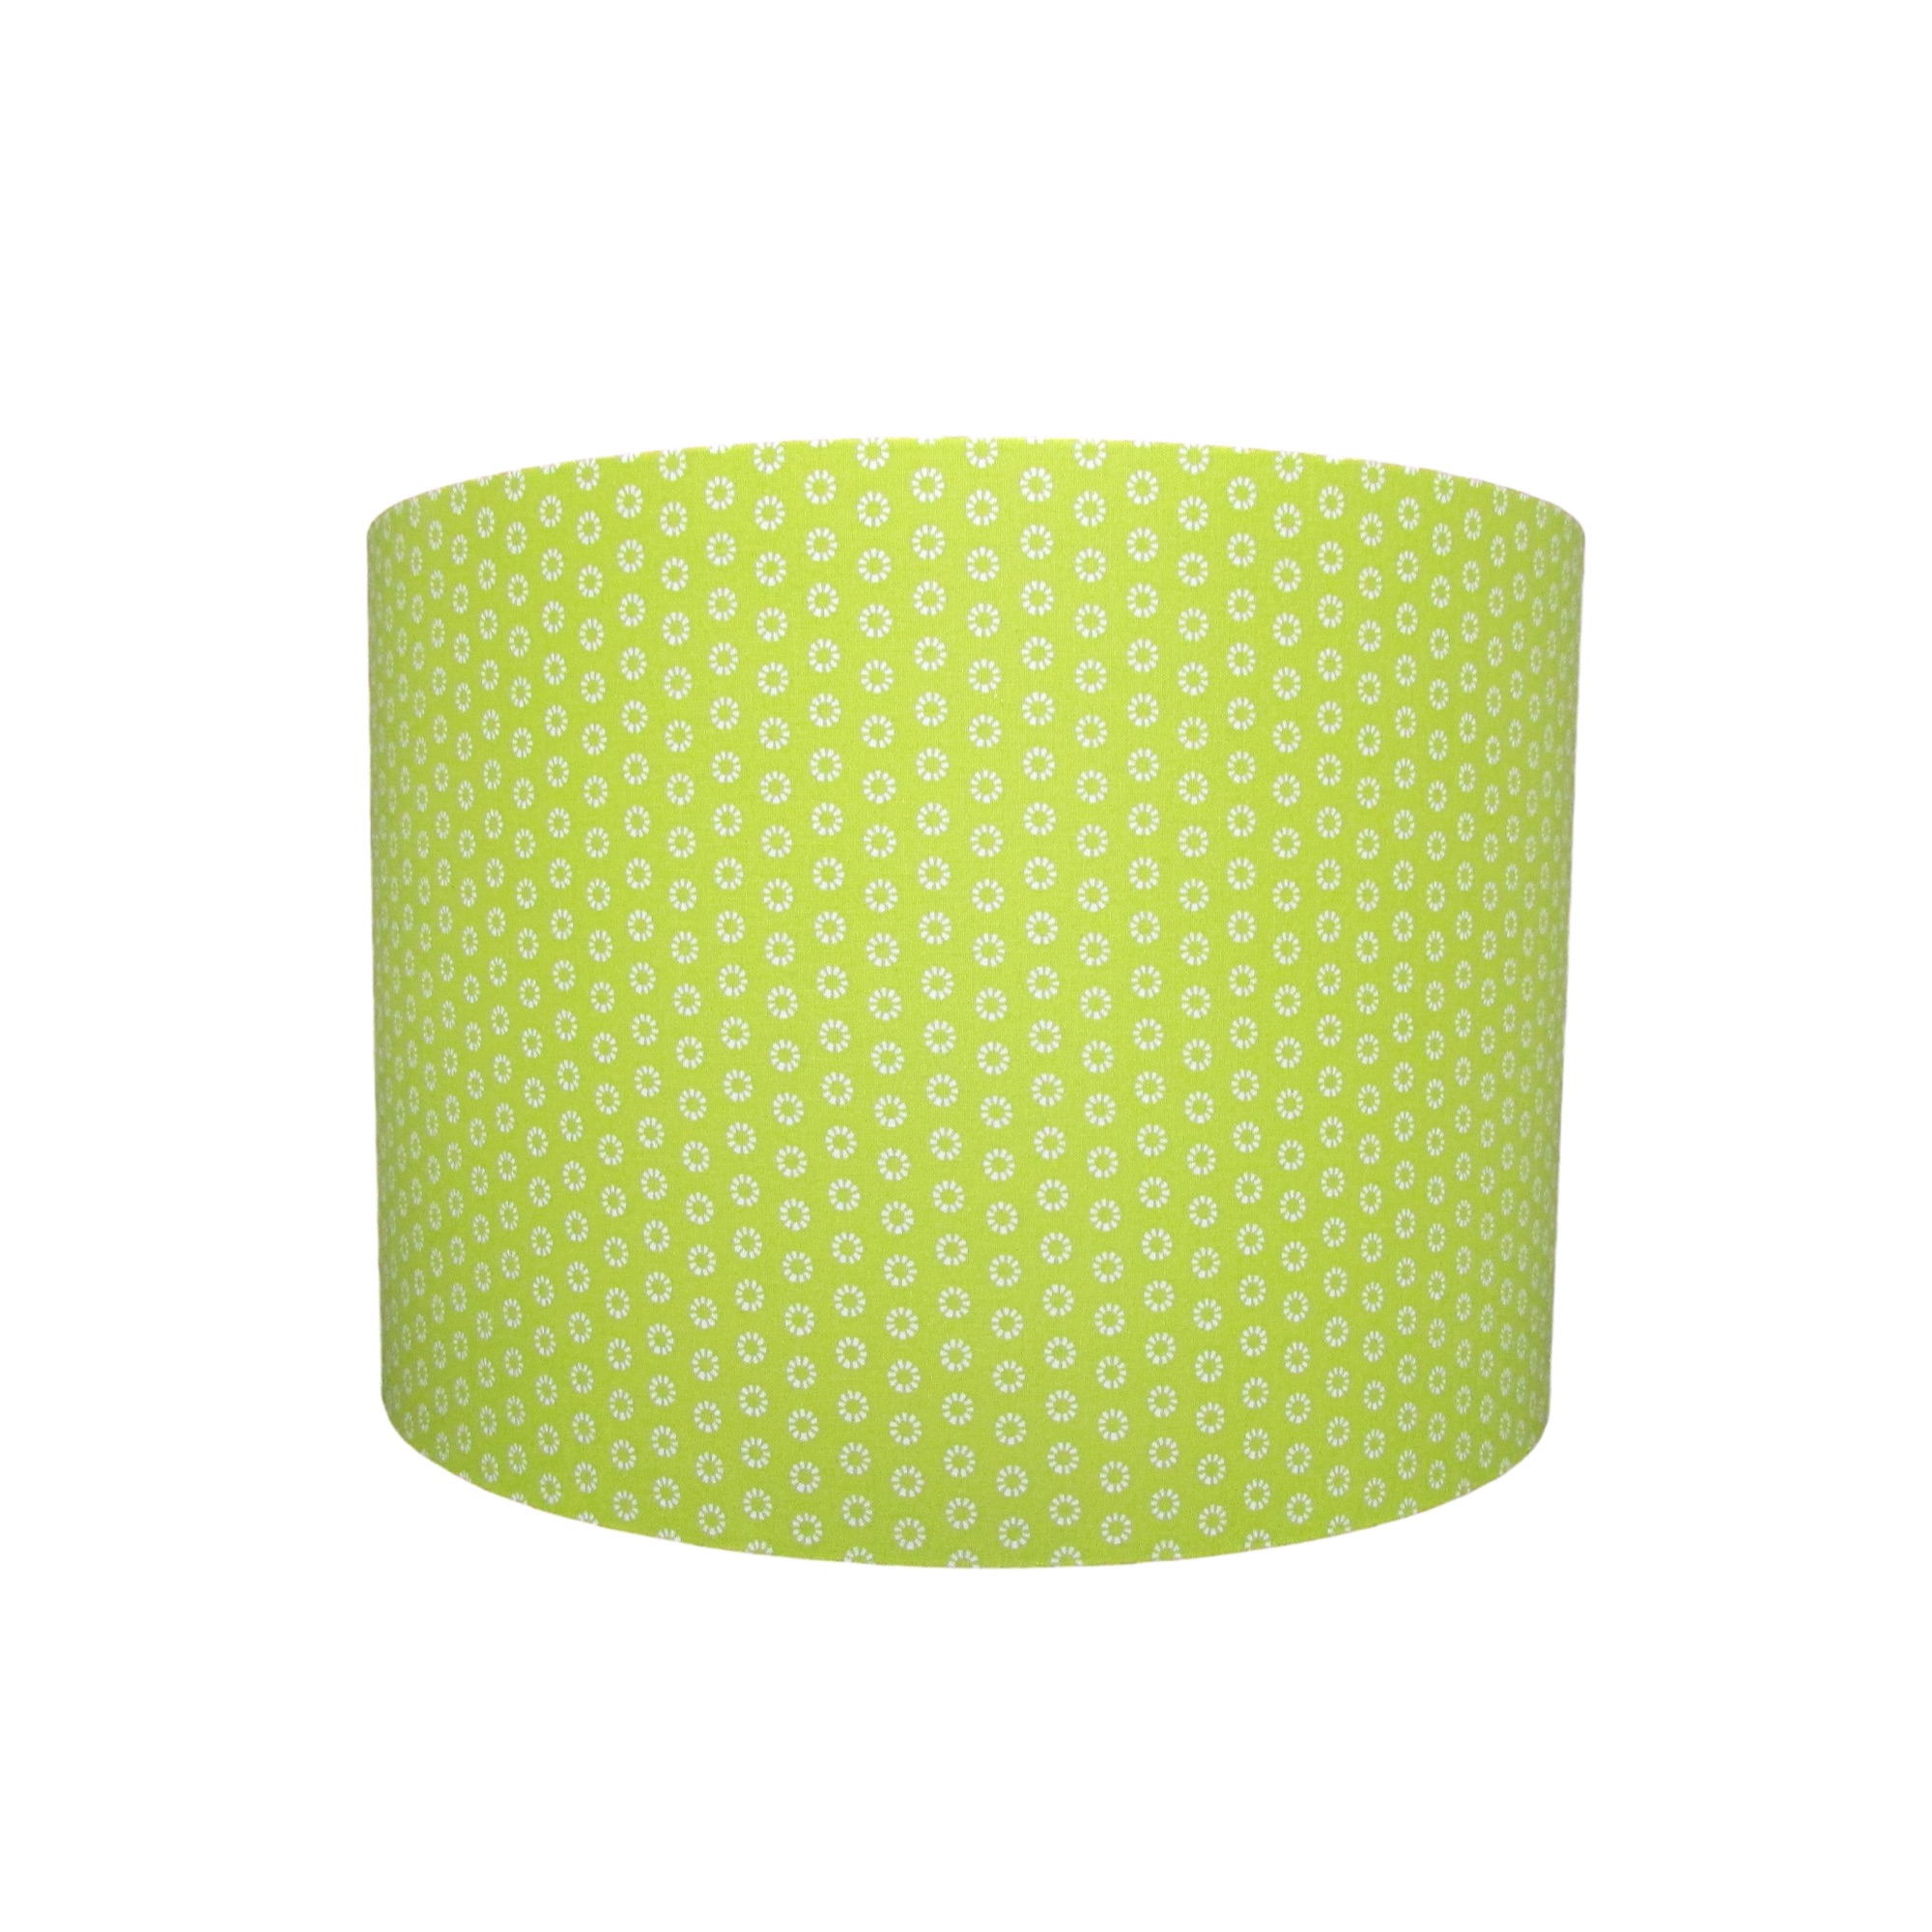 Green marguerite lampshade